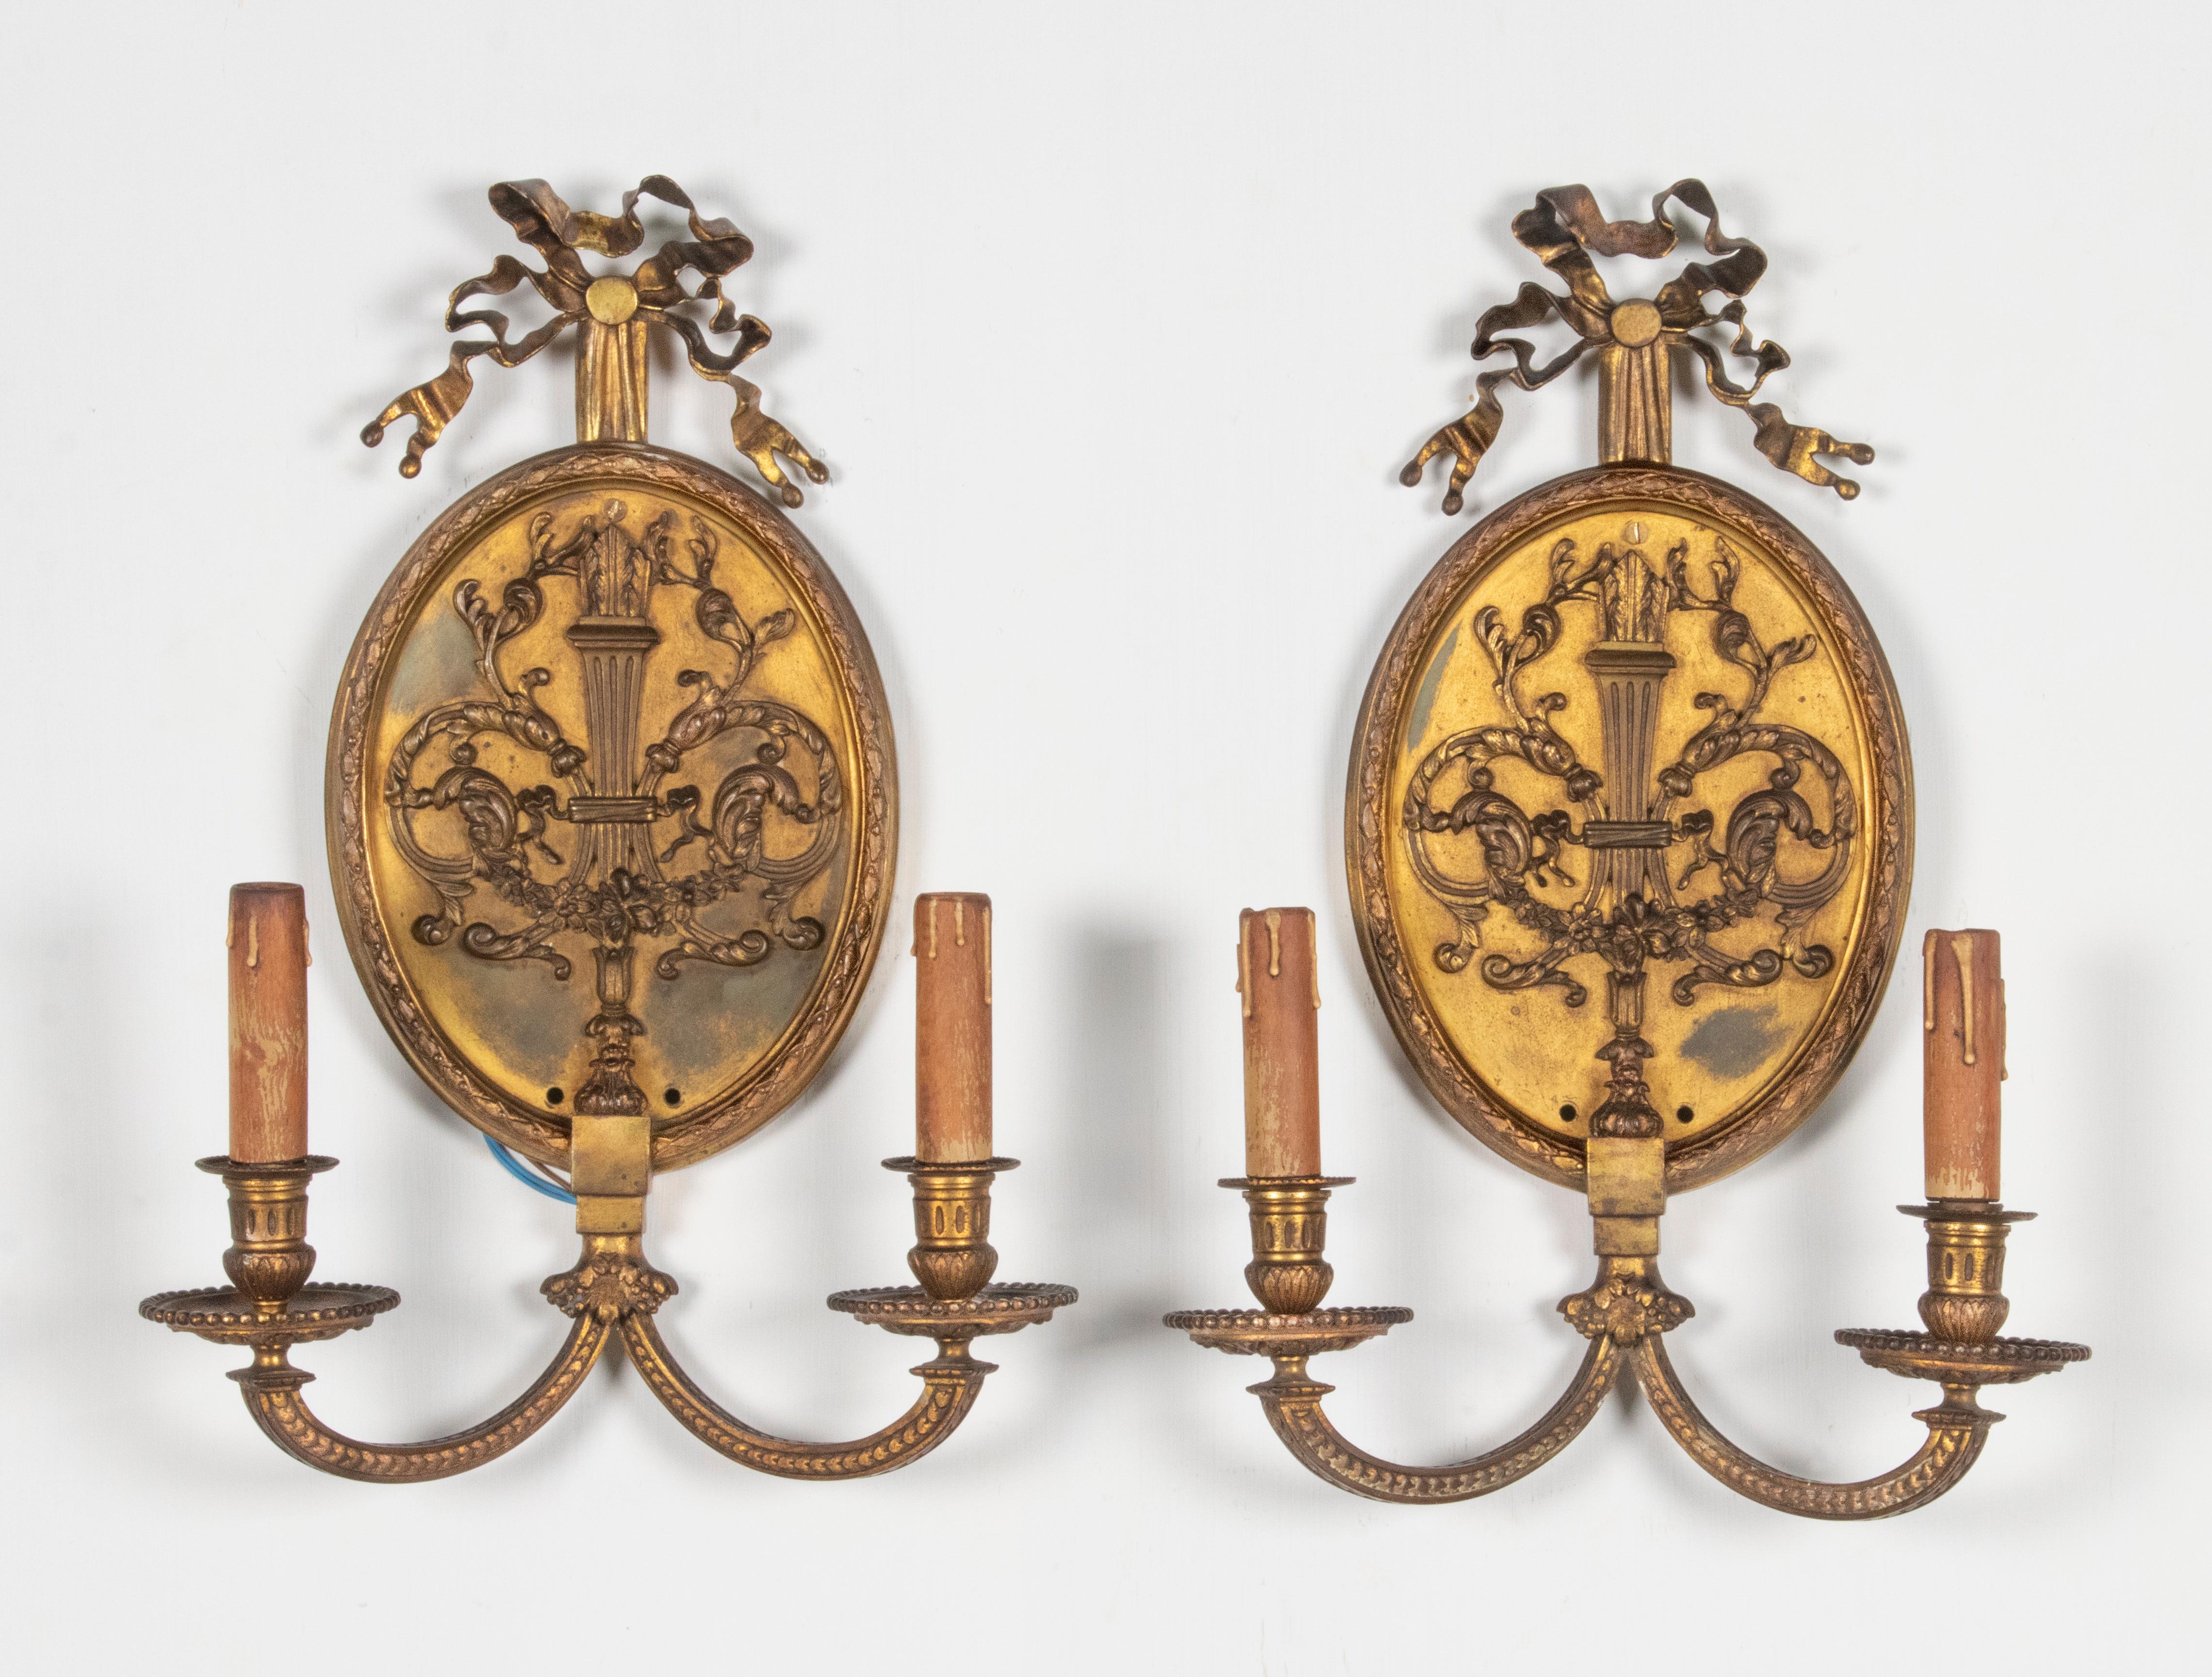 Beautiful antique wall sconces, made of bronze. Originally these were candlesticks and later they were made electric. The lamps have clear characteristics of the Louis XVI style, such as the large medallion shape and the bows at the top. The candles